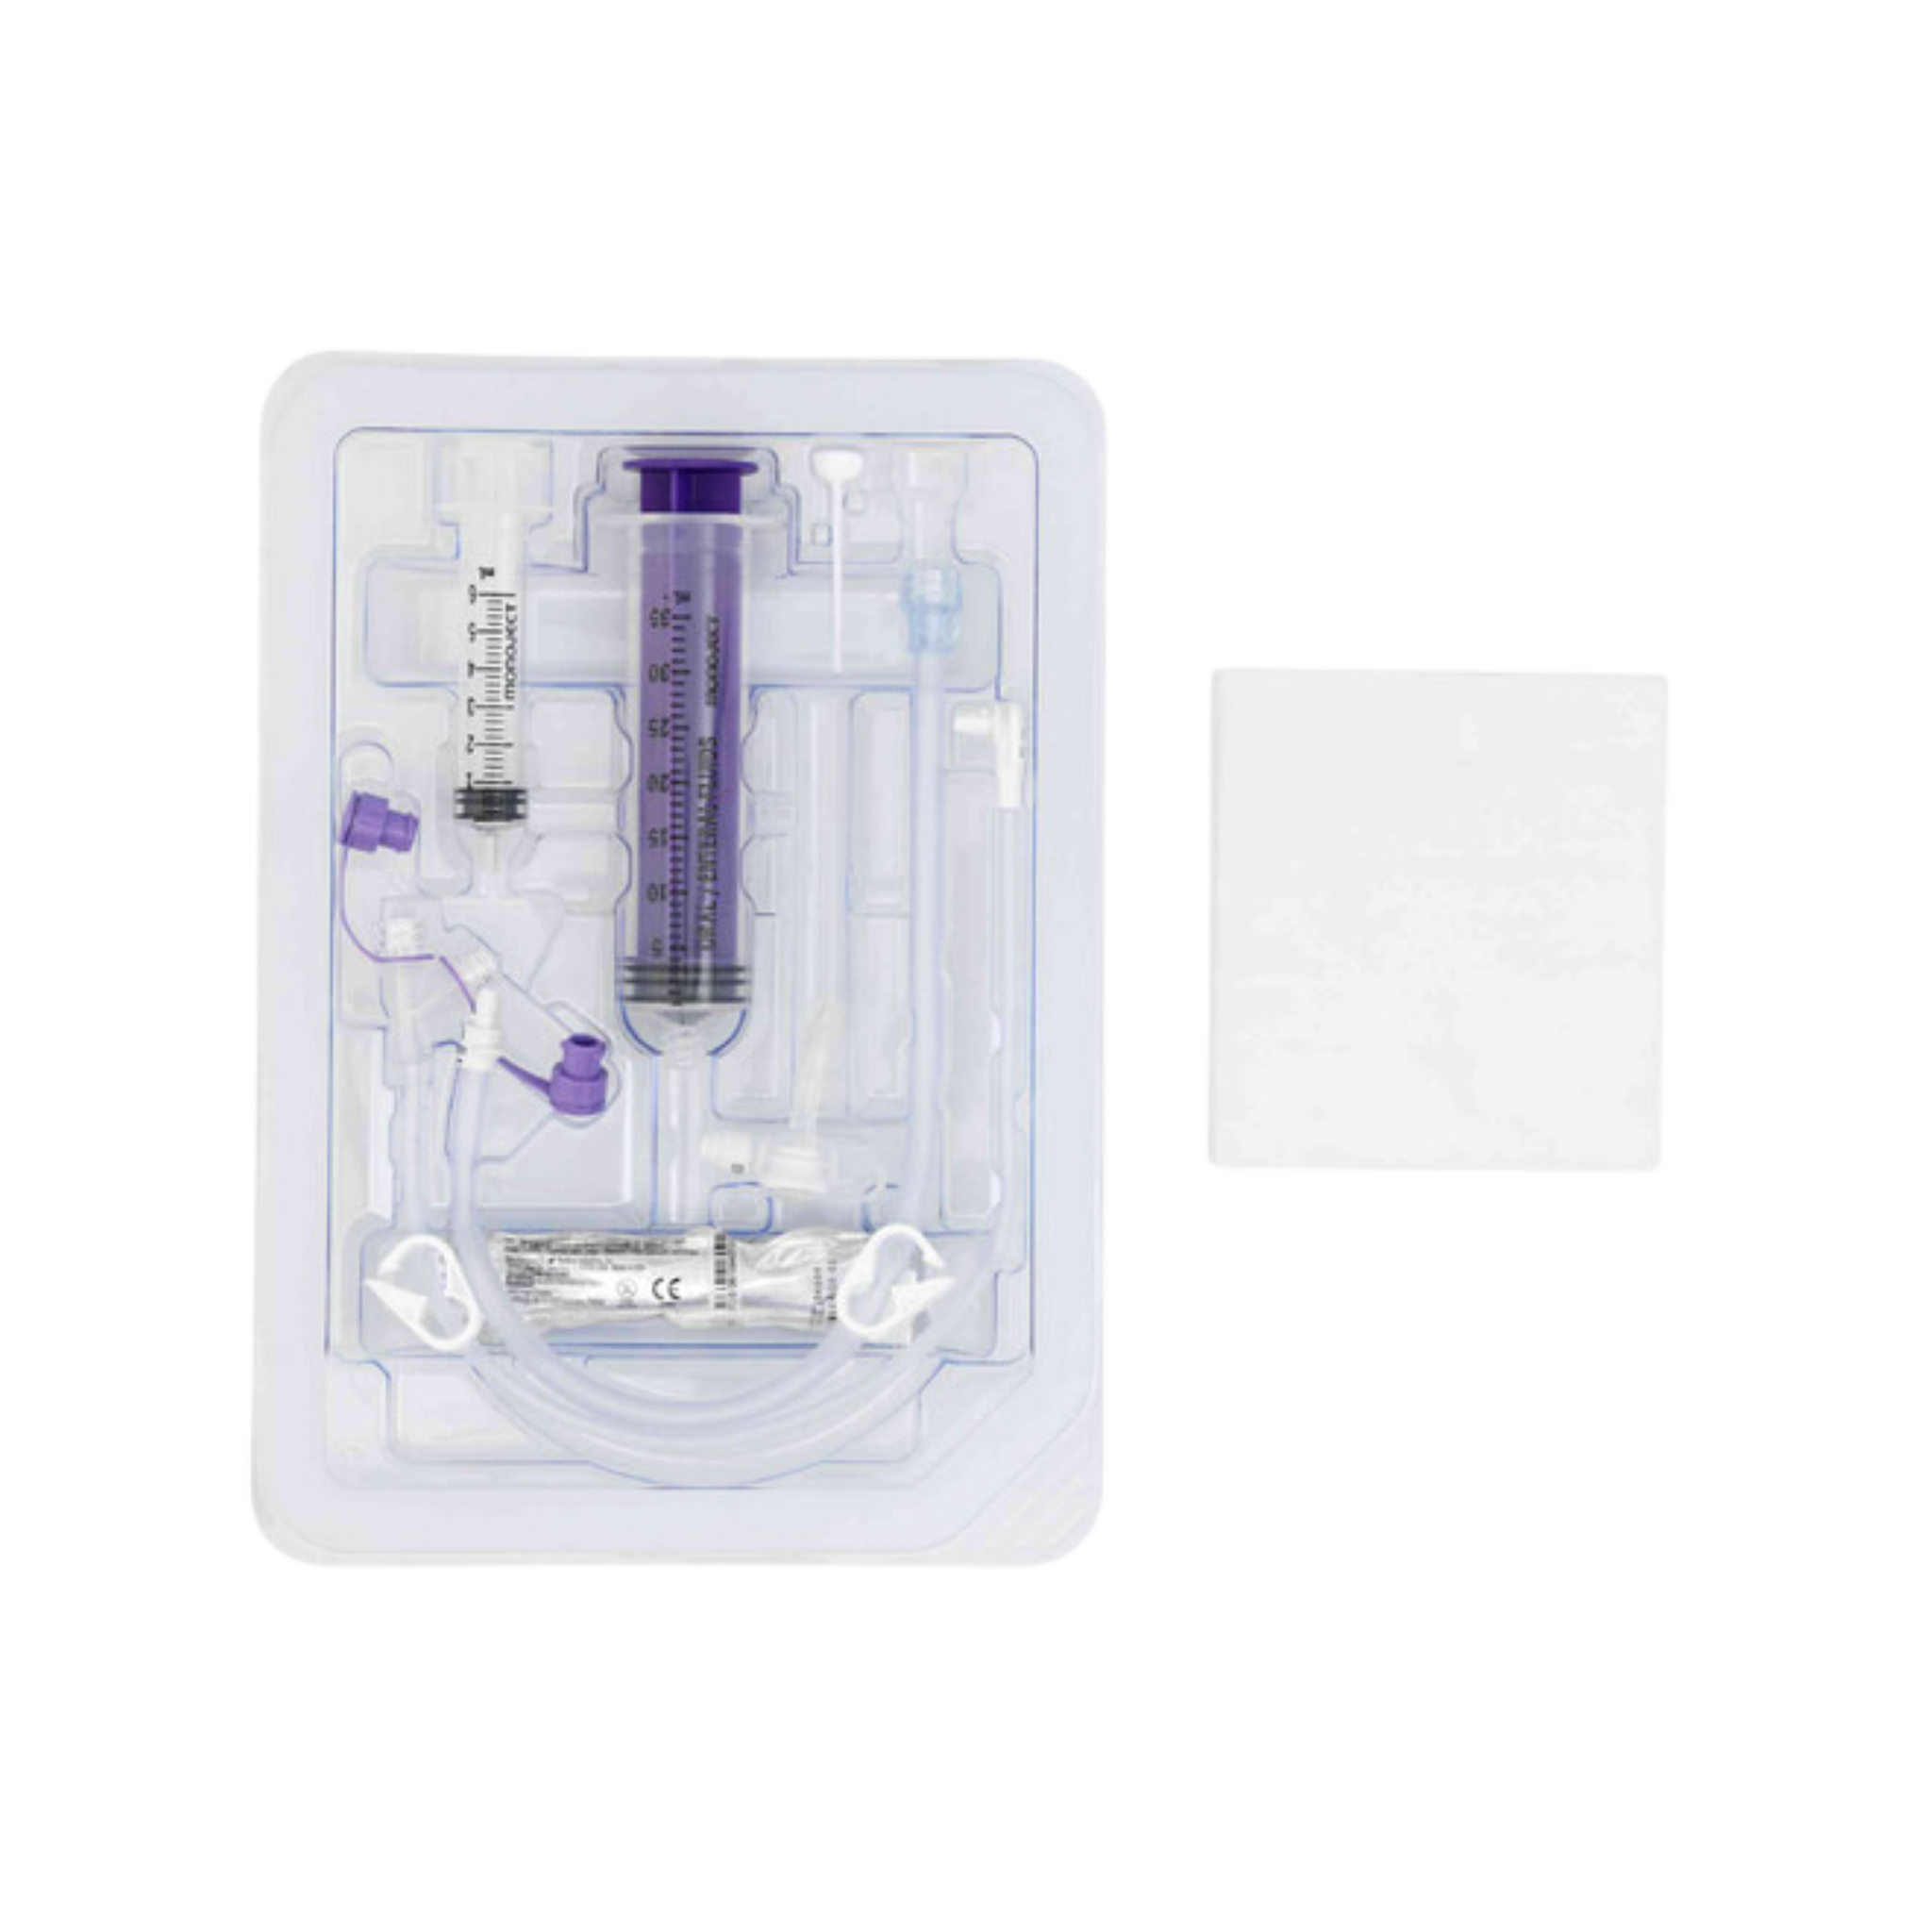 Avanos Mic-Key 12Fr Low-Profile Balloon Gastrostomy Feeding Tube Extension Sets With Enfit Connectors - All Lengths